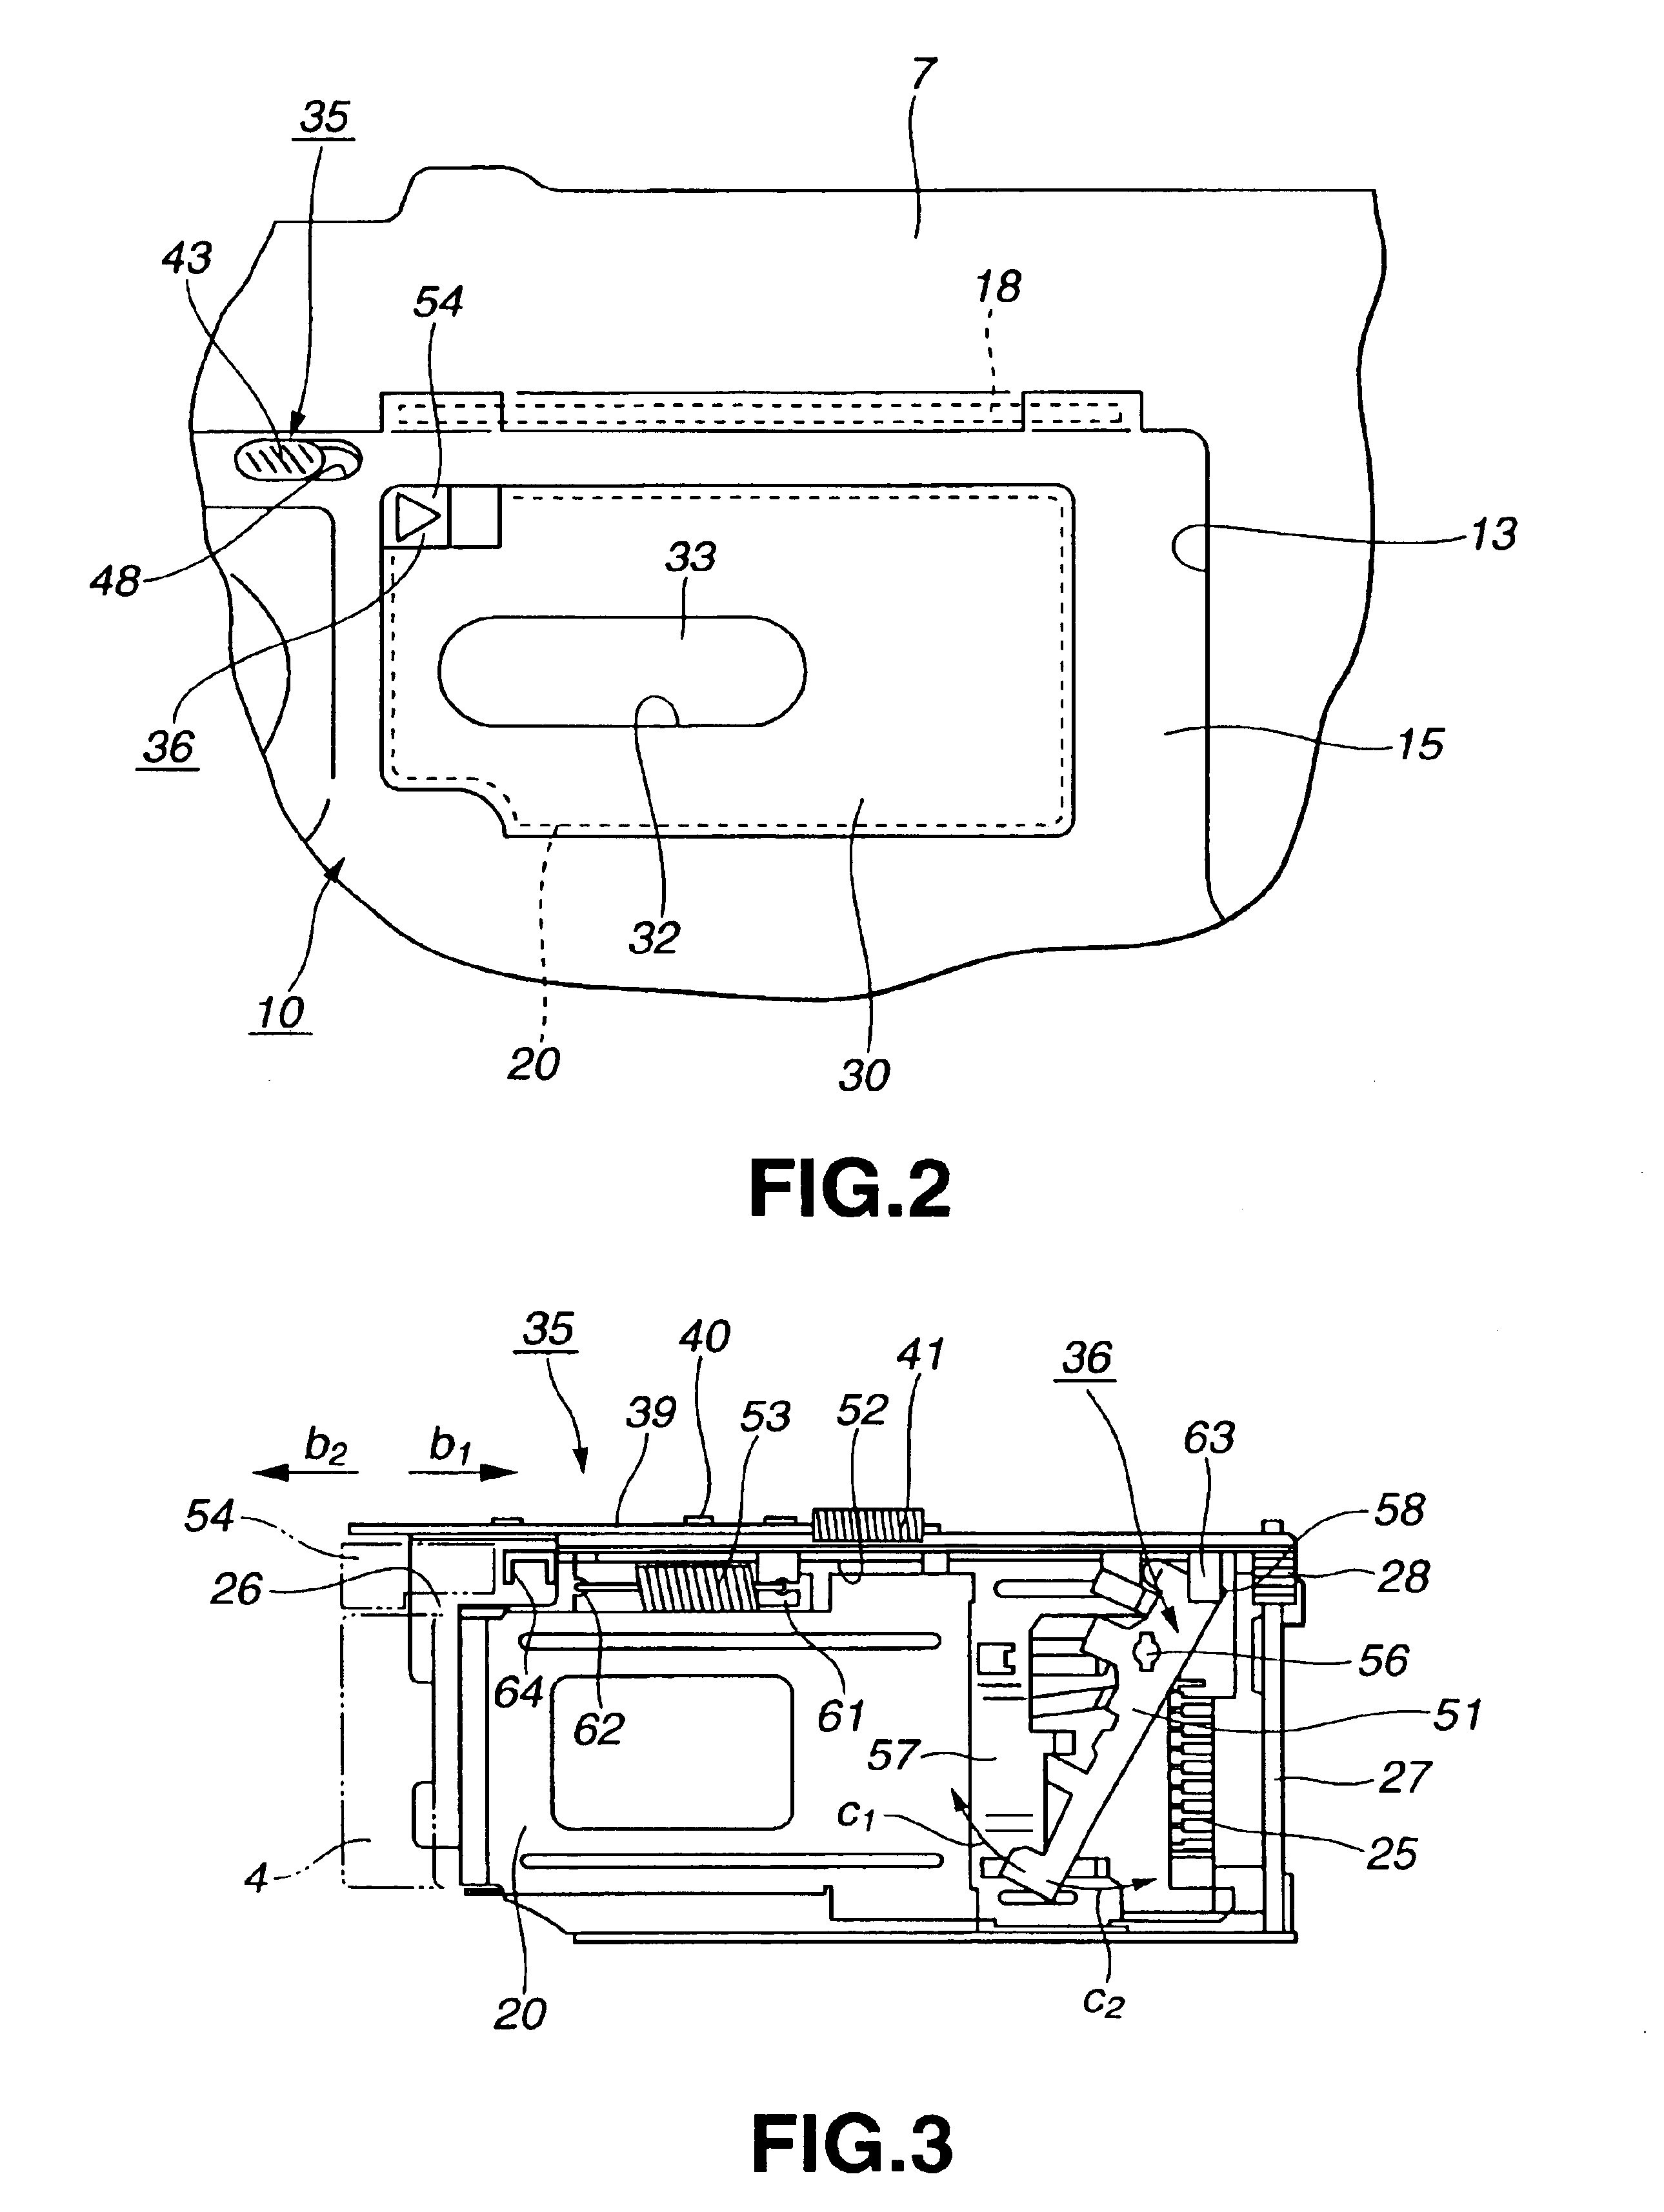 Electronic equipment for loading thereon a recording medium employing a solid-state memory element